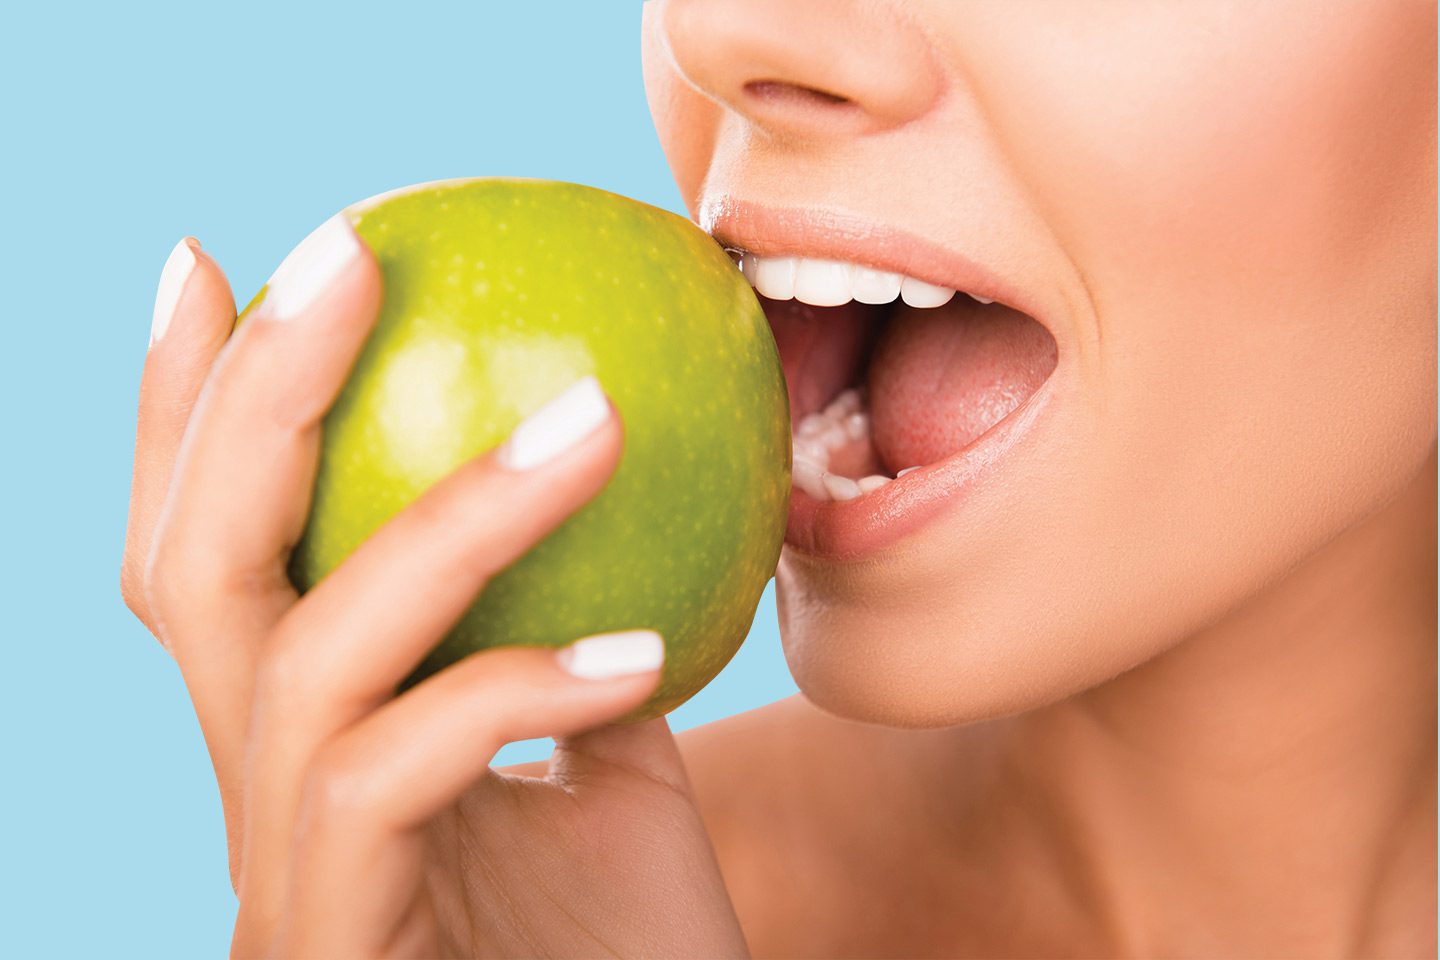 woman with healthy teeth eating an apple